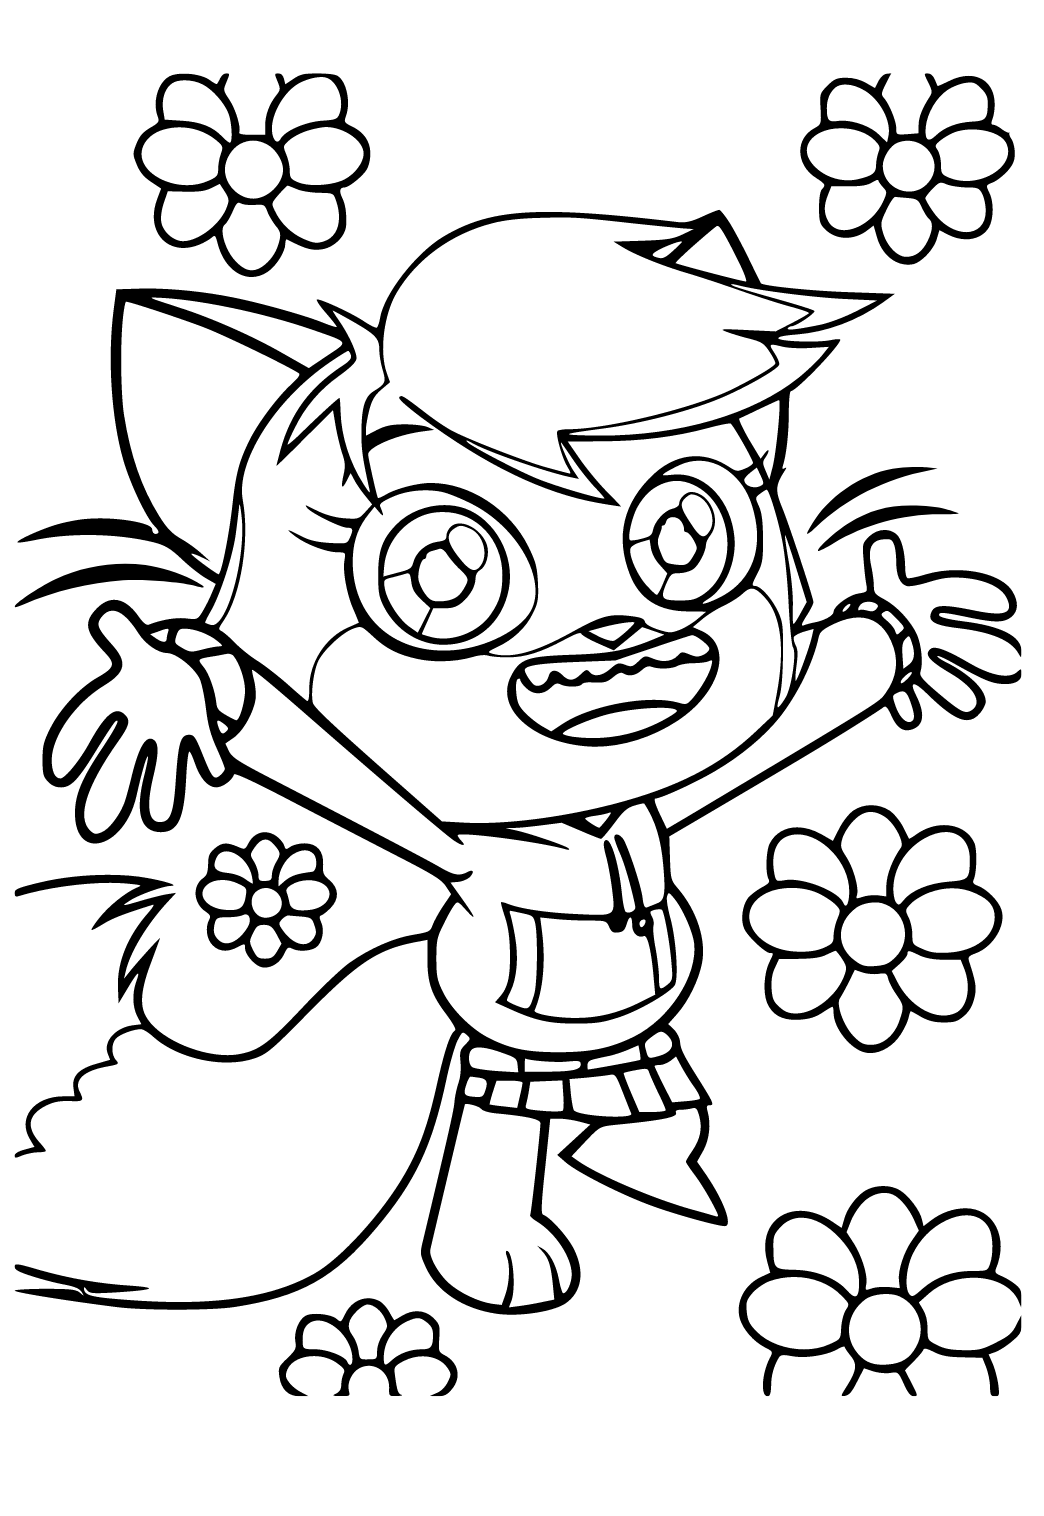 Free printable ryans world flowers coloring page for adults and kids